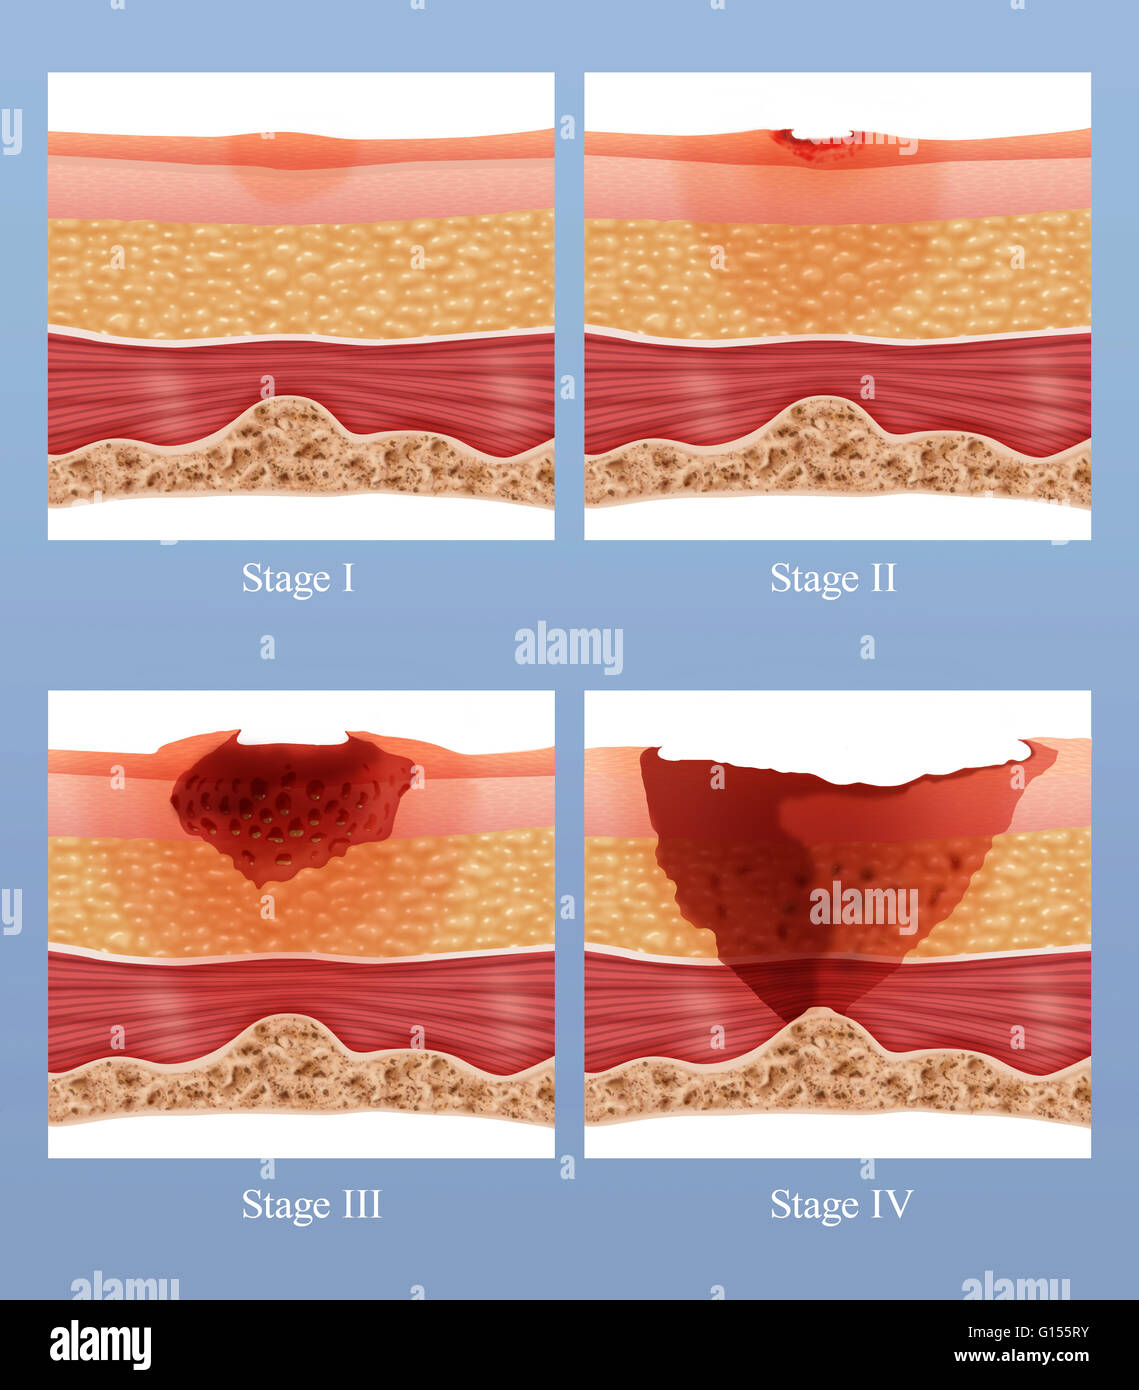 Illustration showing the stages of of a bed sore or pressure ulcer. Bed  sores can be caused by many factors including unrelieved pressure,  friction, humidity, etc. Bed sores usually afflict the frail